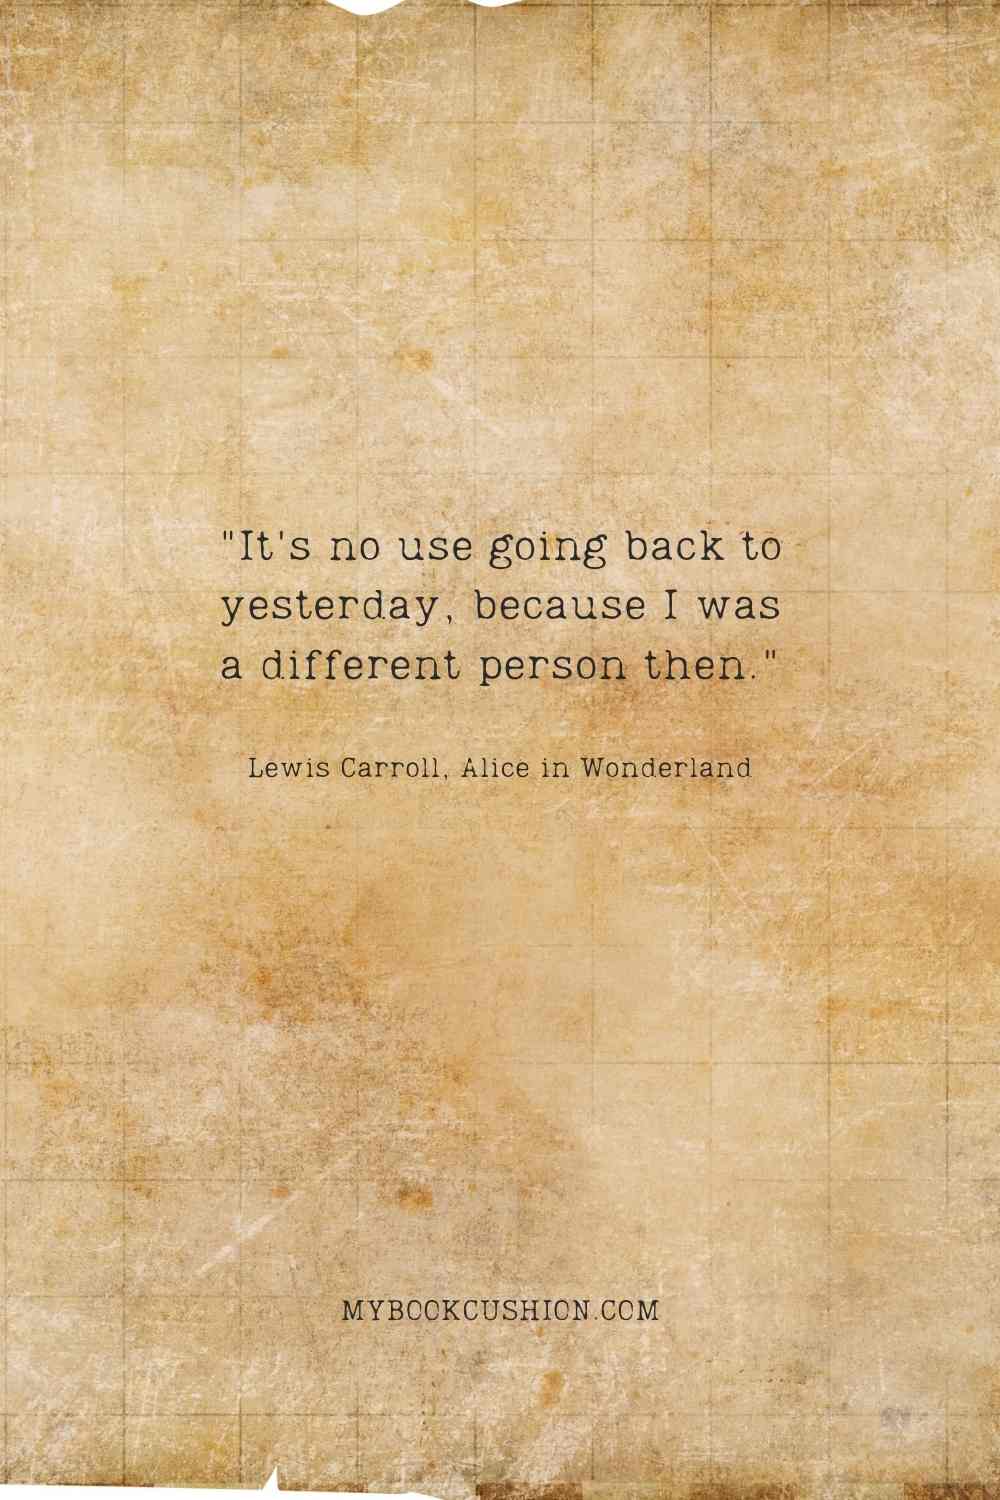 It's no use going back to yesterday, because I was a different person then. - Lewis Carroll, Alice in Wonderland